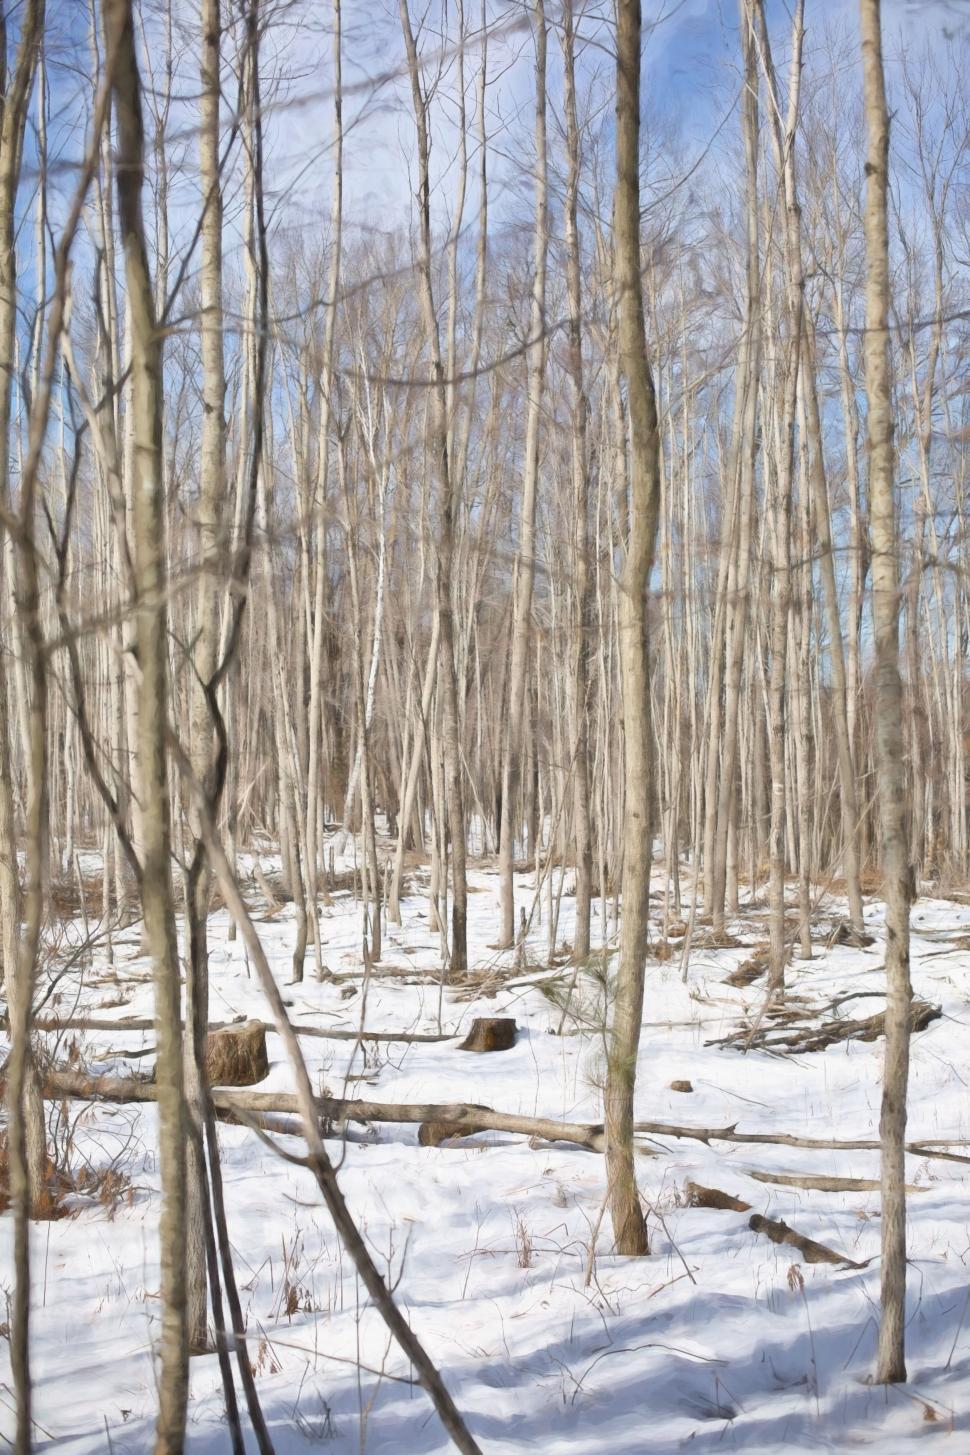 Free Image of Birch Trees in Winter  